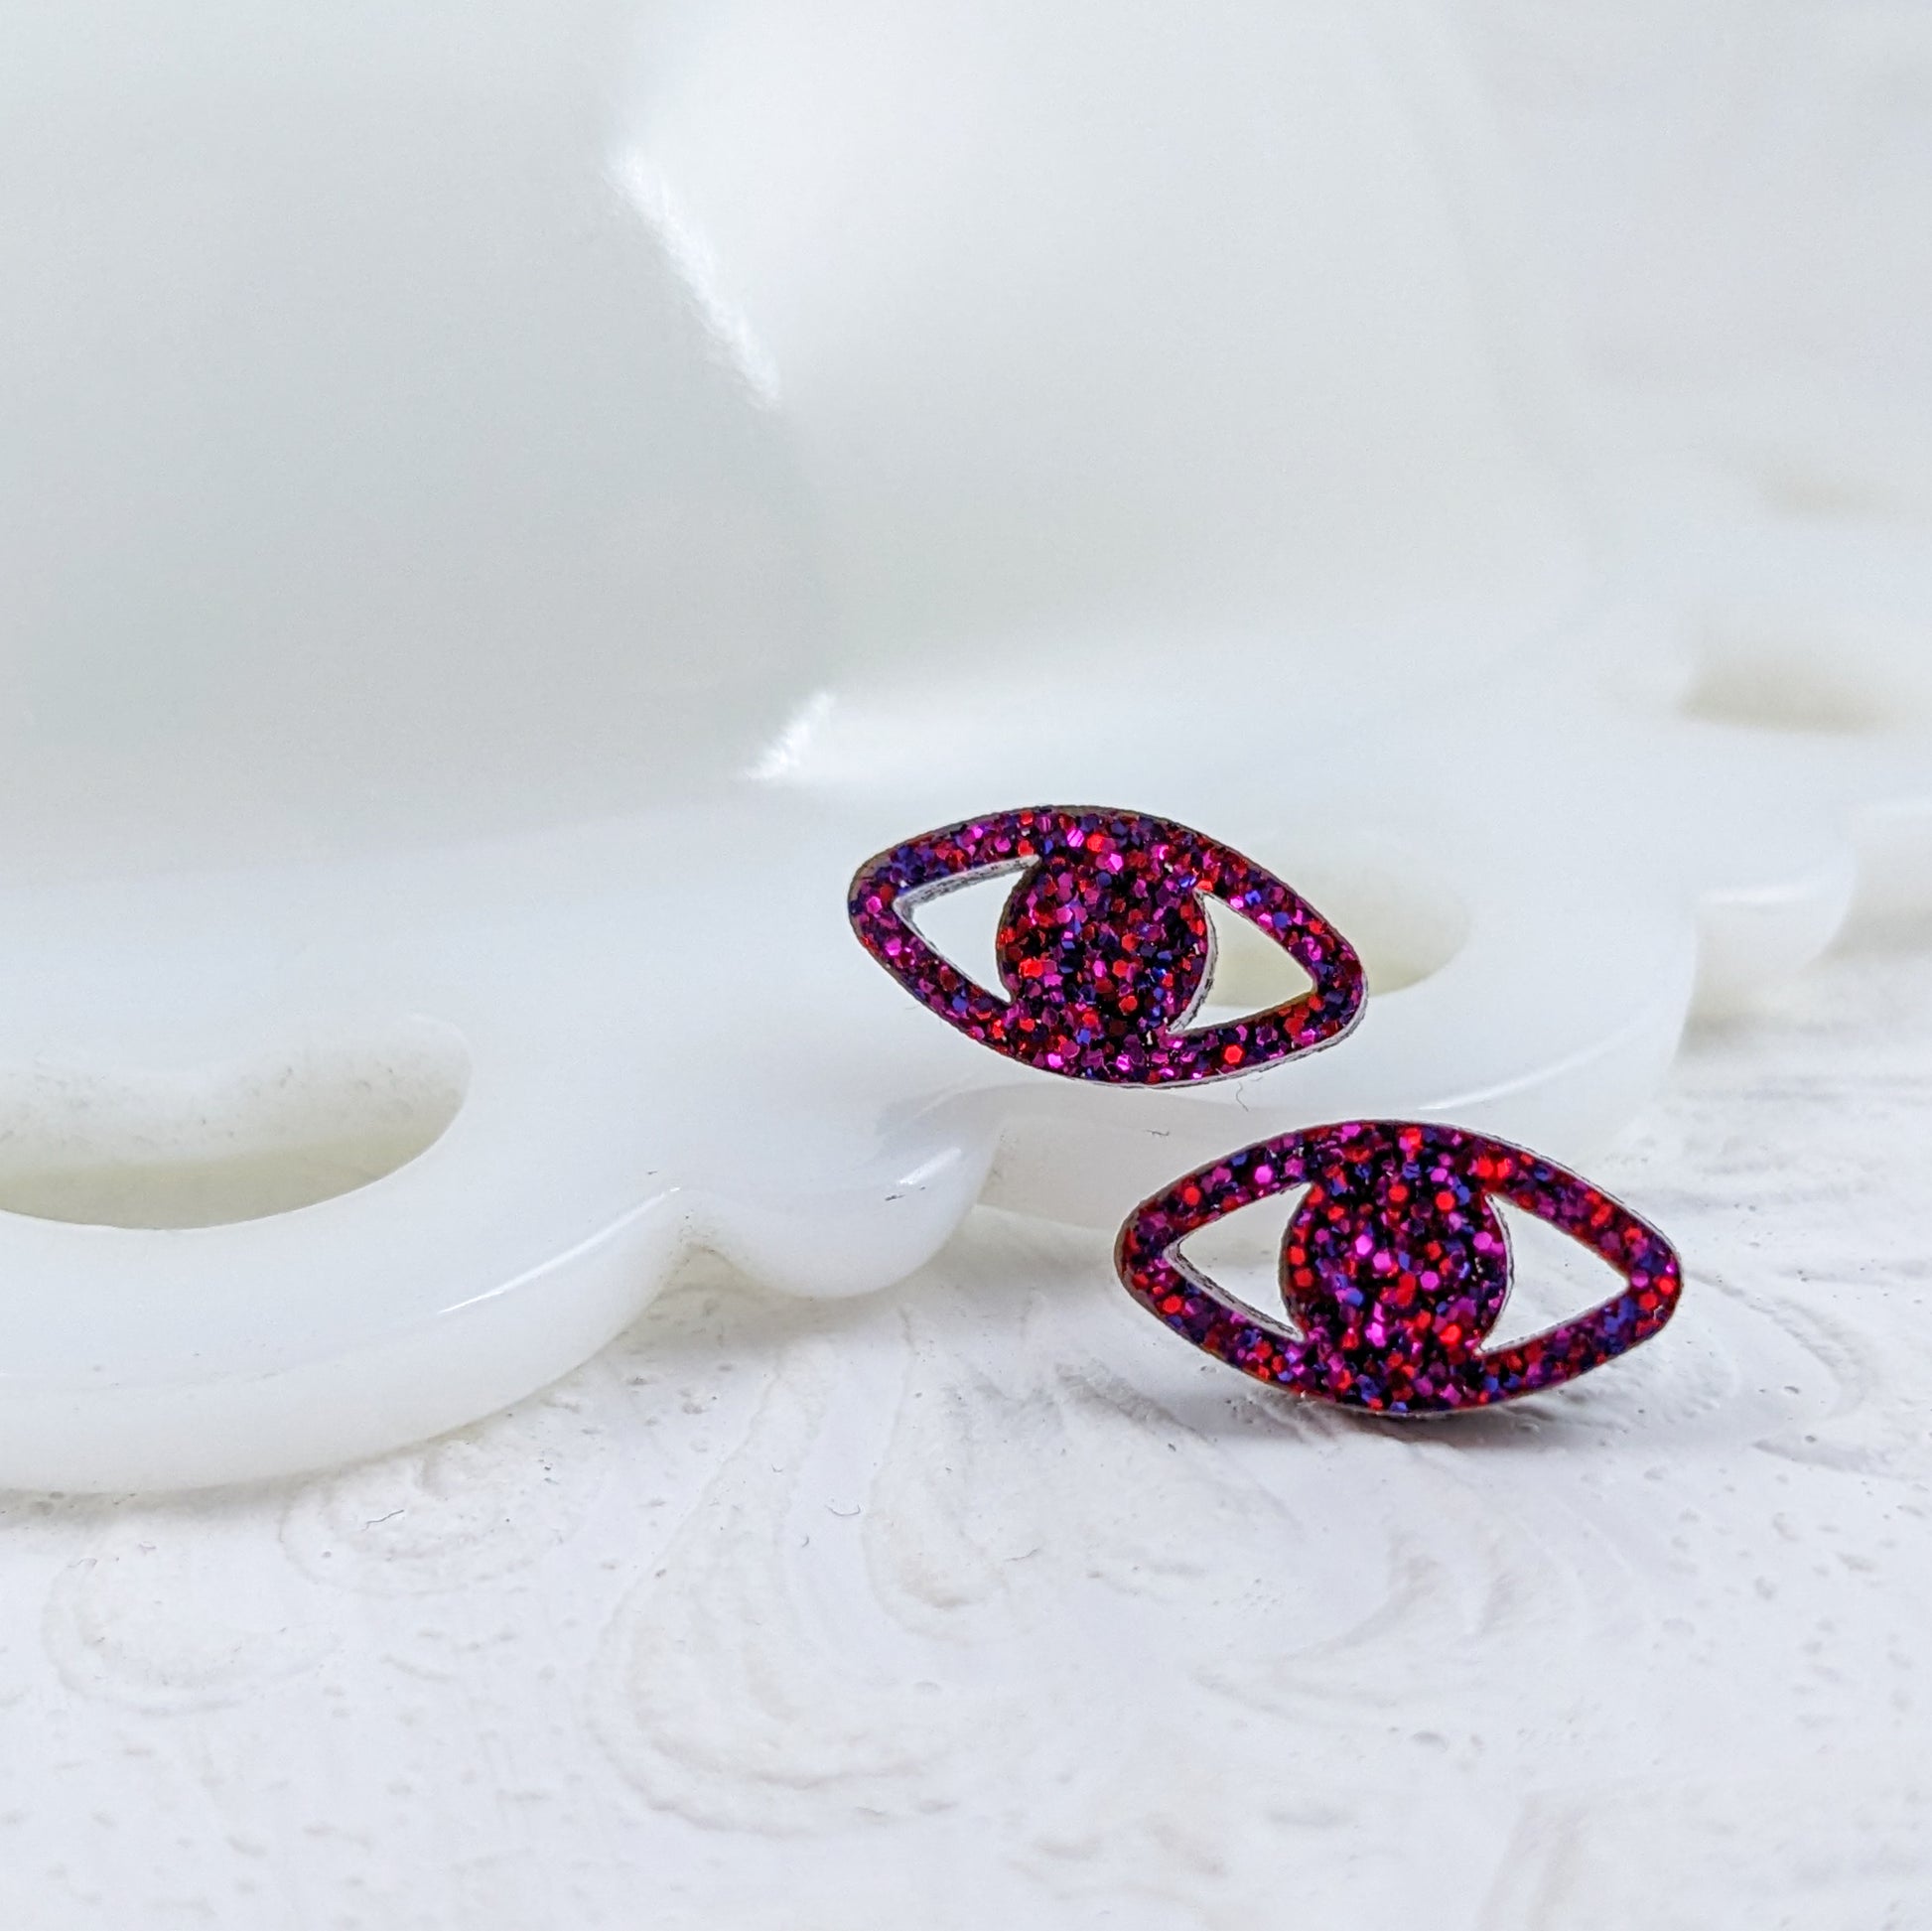 Peepers - Eye shaped stud earrings made with ruby sparkle acrylic and stainless steel posts in front of vintage white milkglass